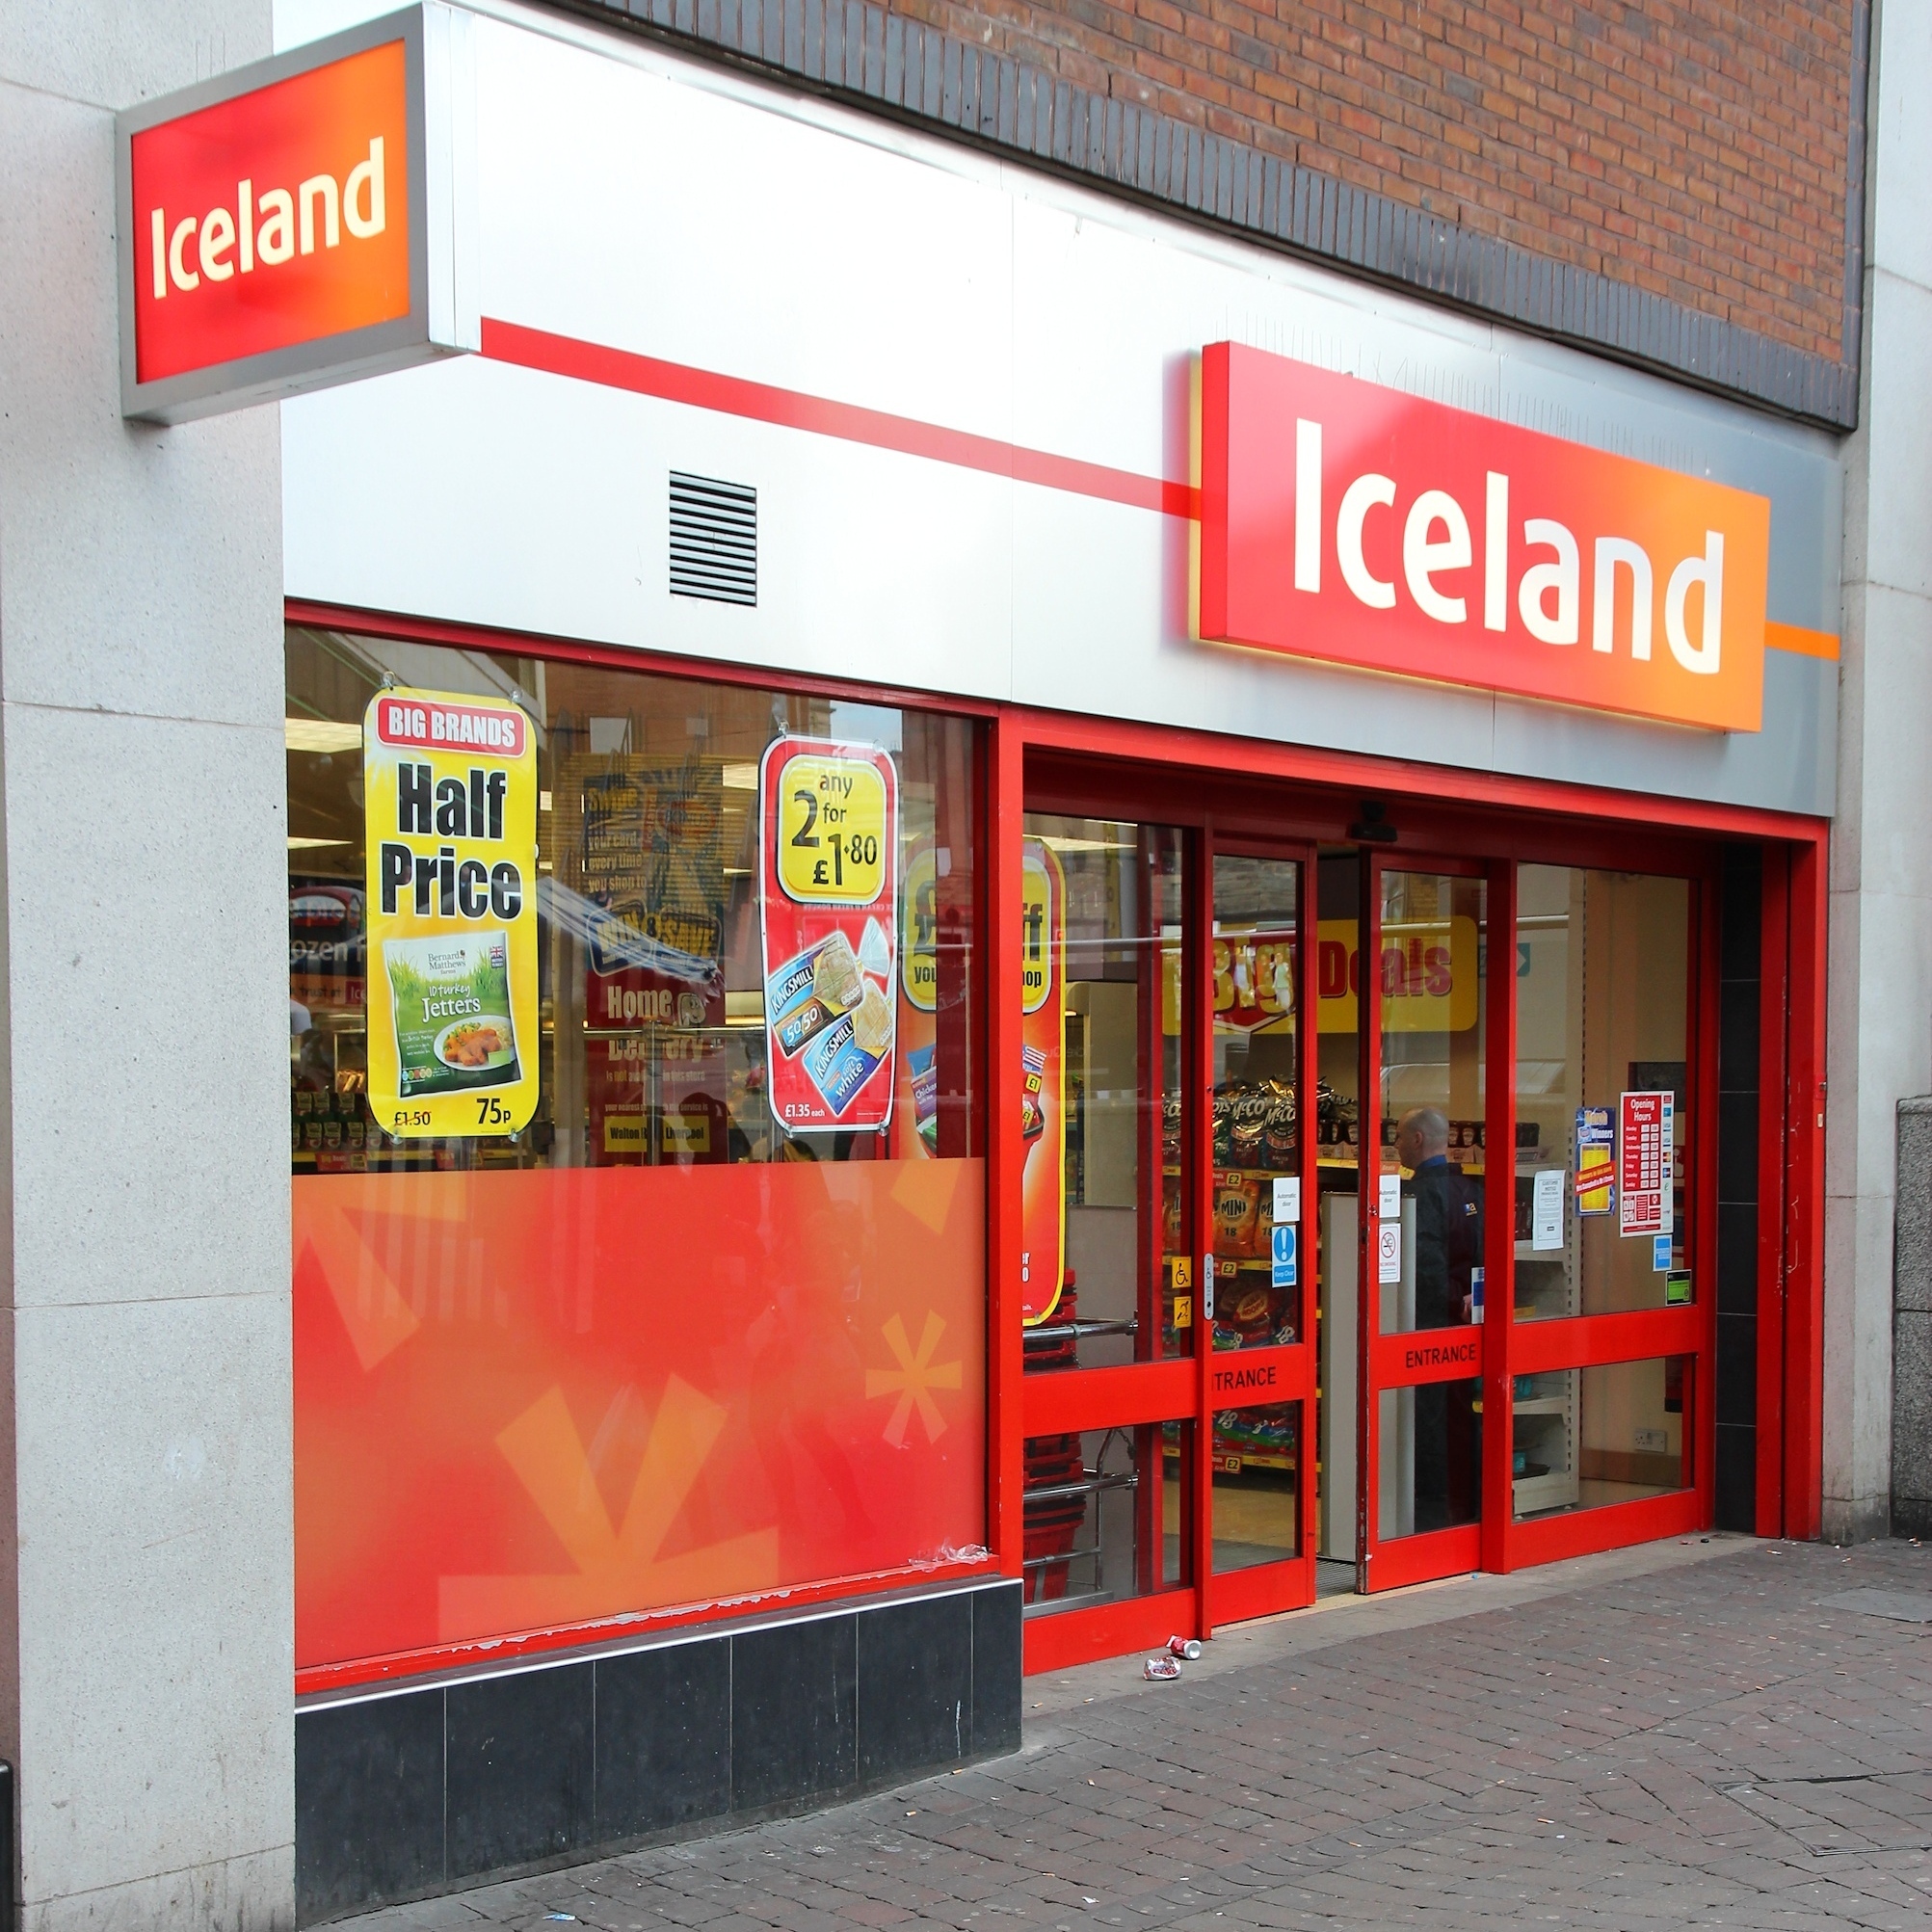 Iceland ‘s new NI depot bids to smooth post-Brexit trading